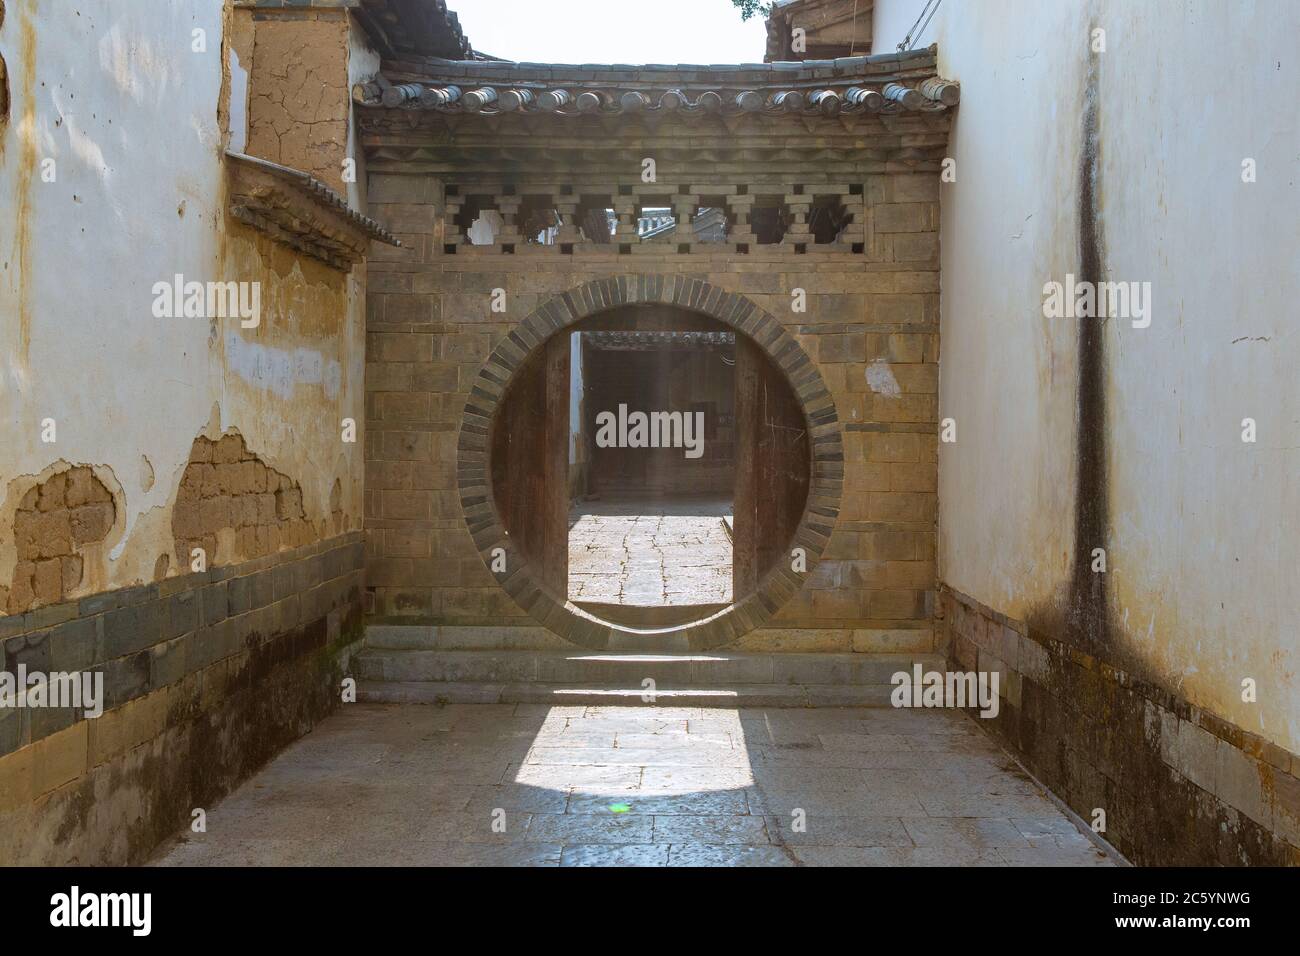 Traditional Chinese Architectures in Jianshui old town, in Yunnan Province, China. Stock Photo